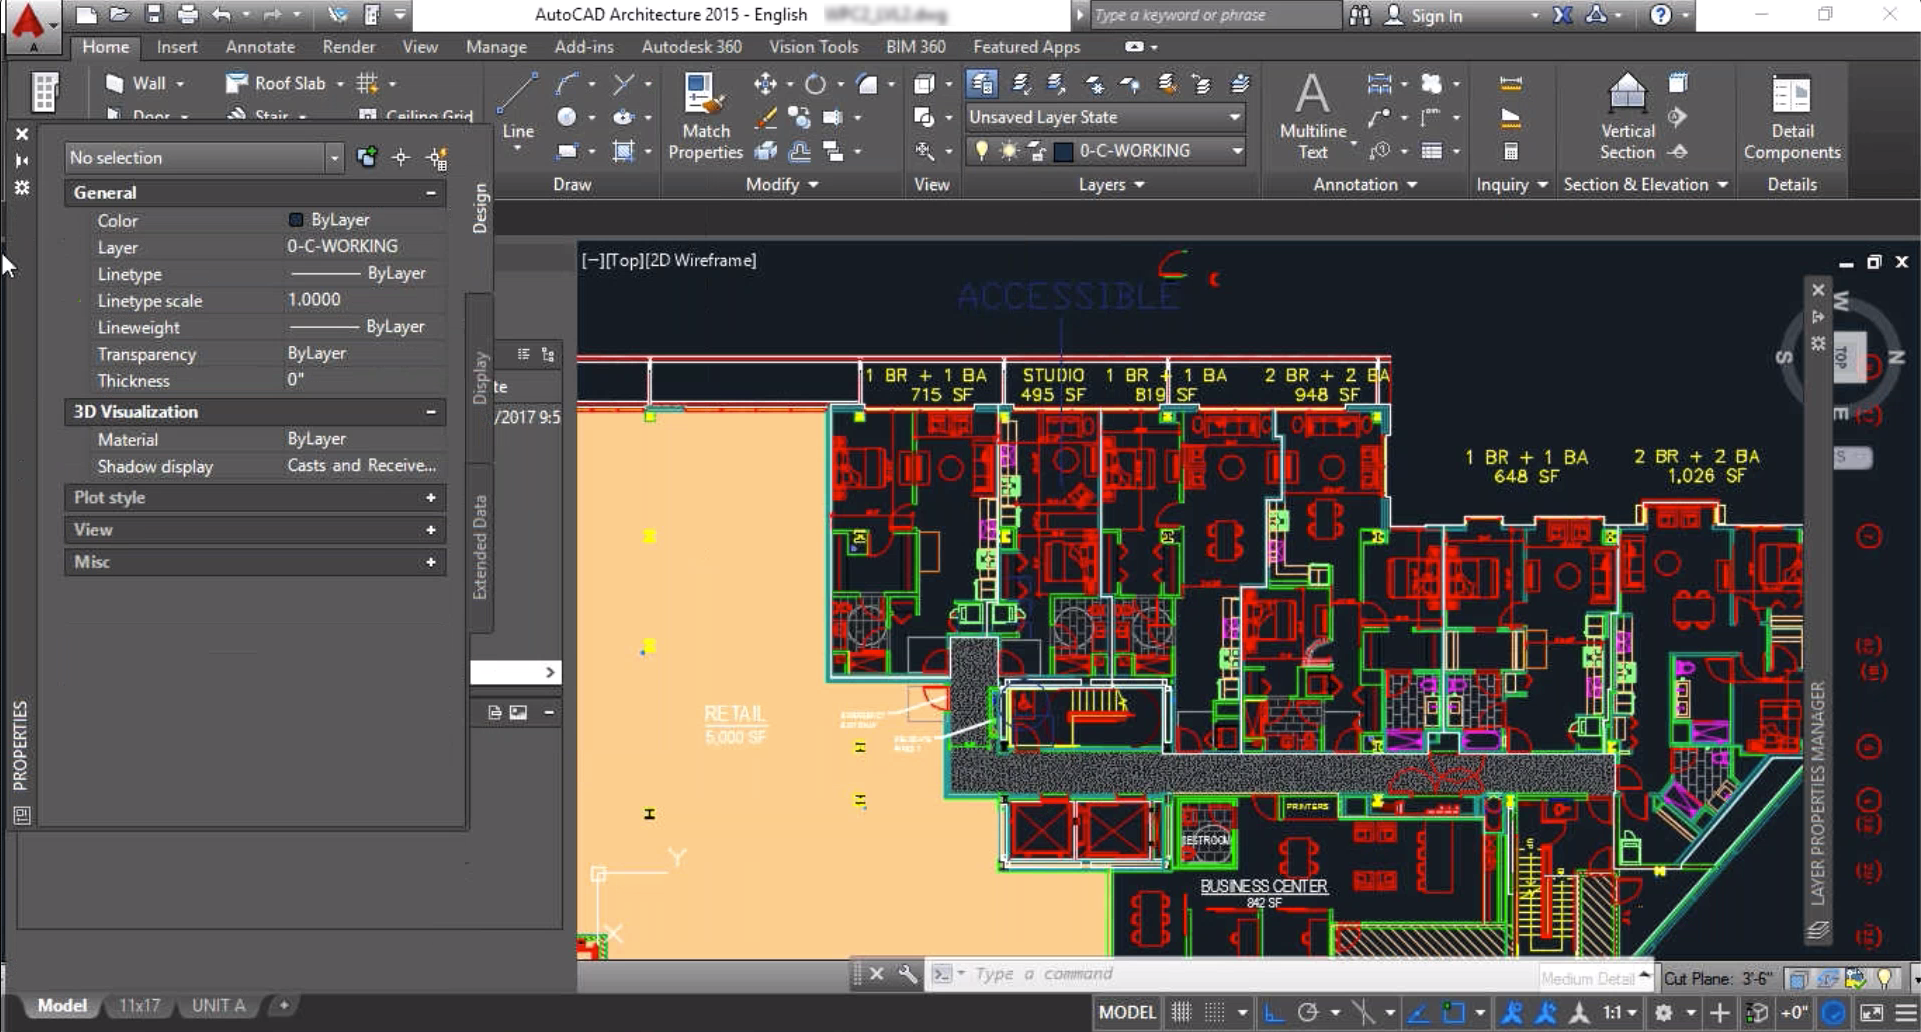 An AutoCAD window that couldn't be snapped to one side of the screen for mysterious reasons